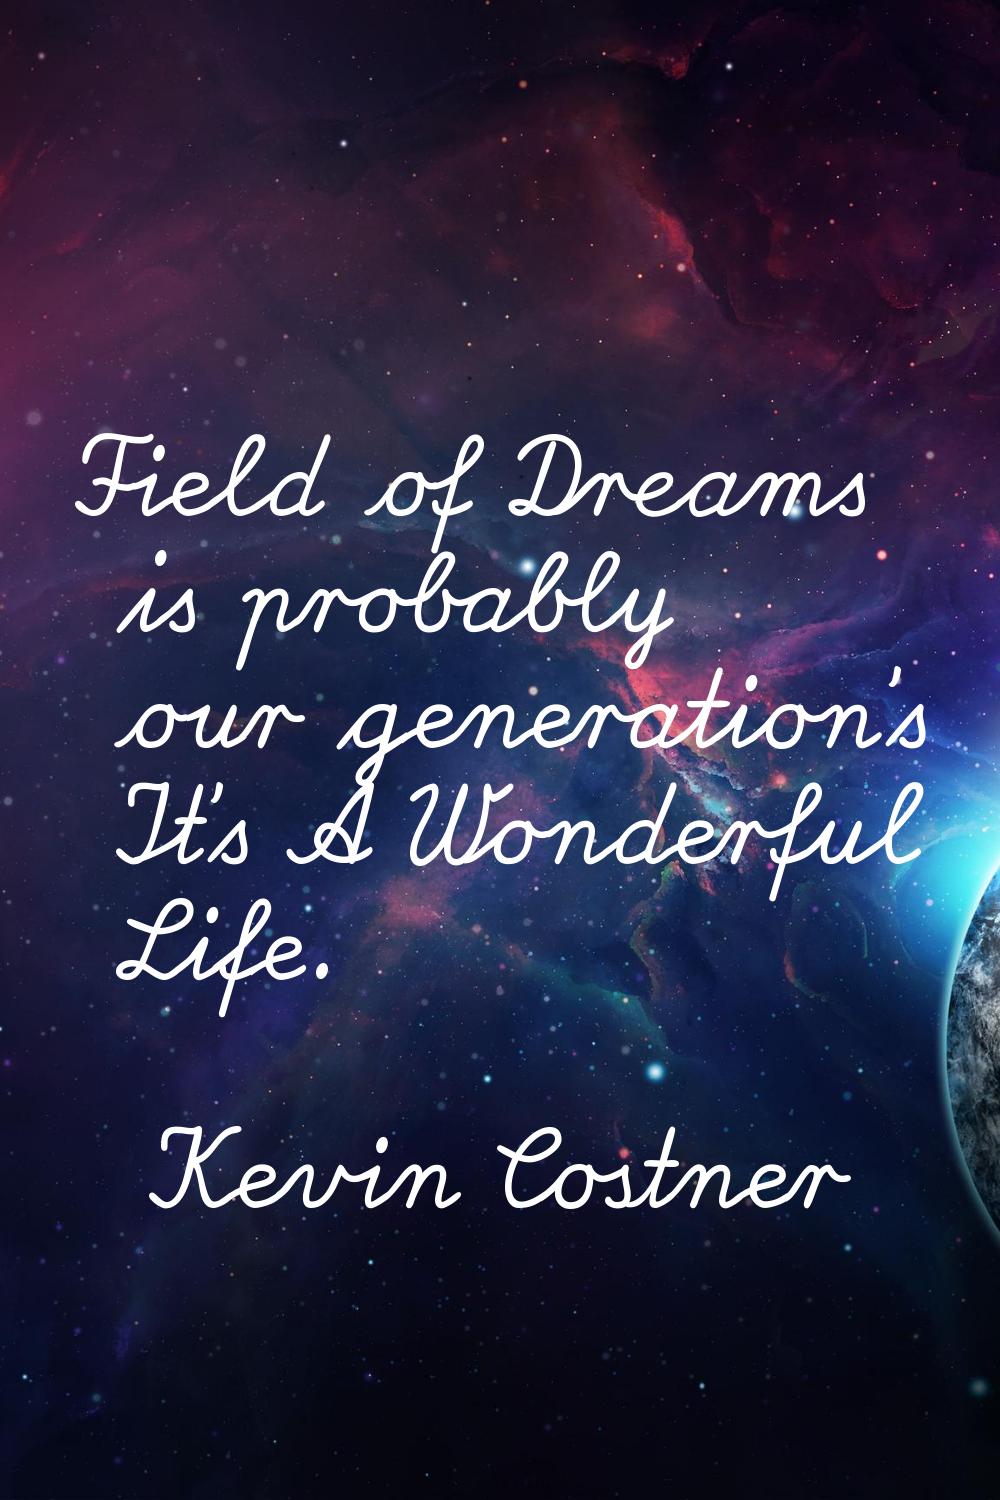 Field of Dreams is probably our generation's It's A Wonderful Life.